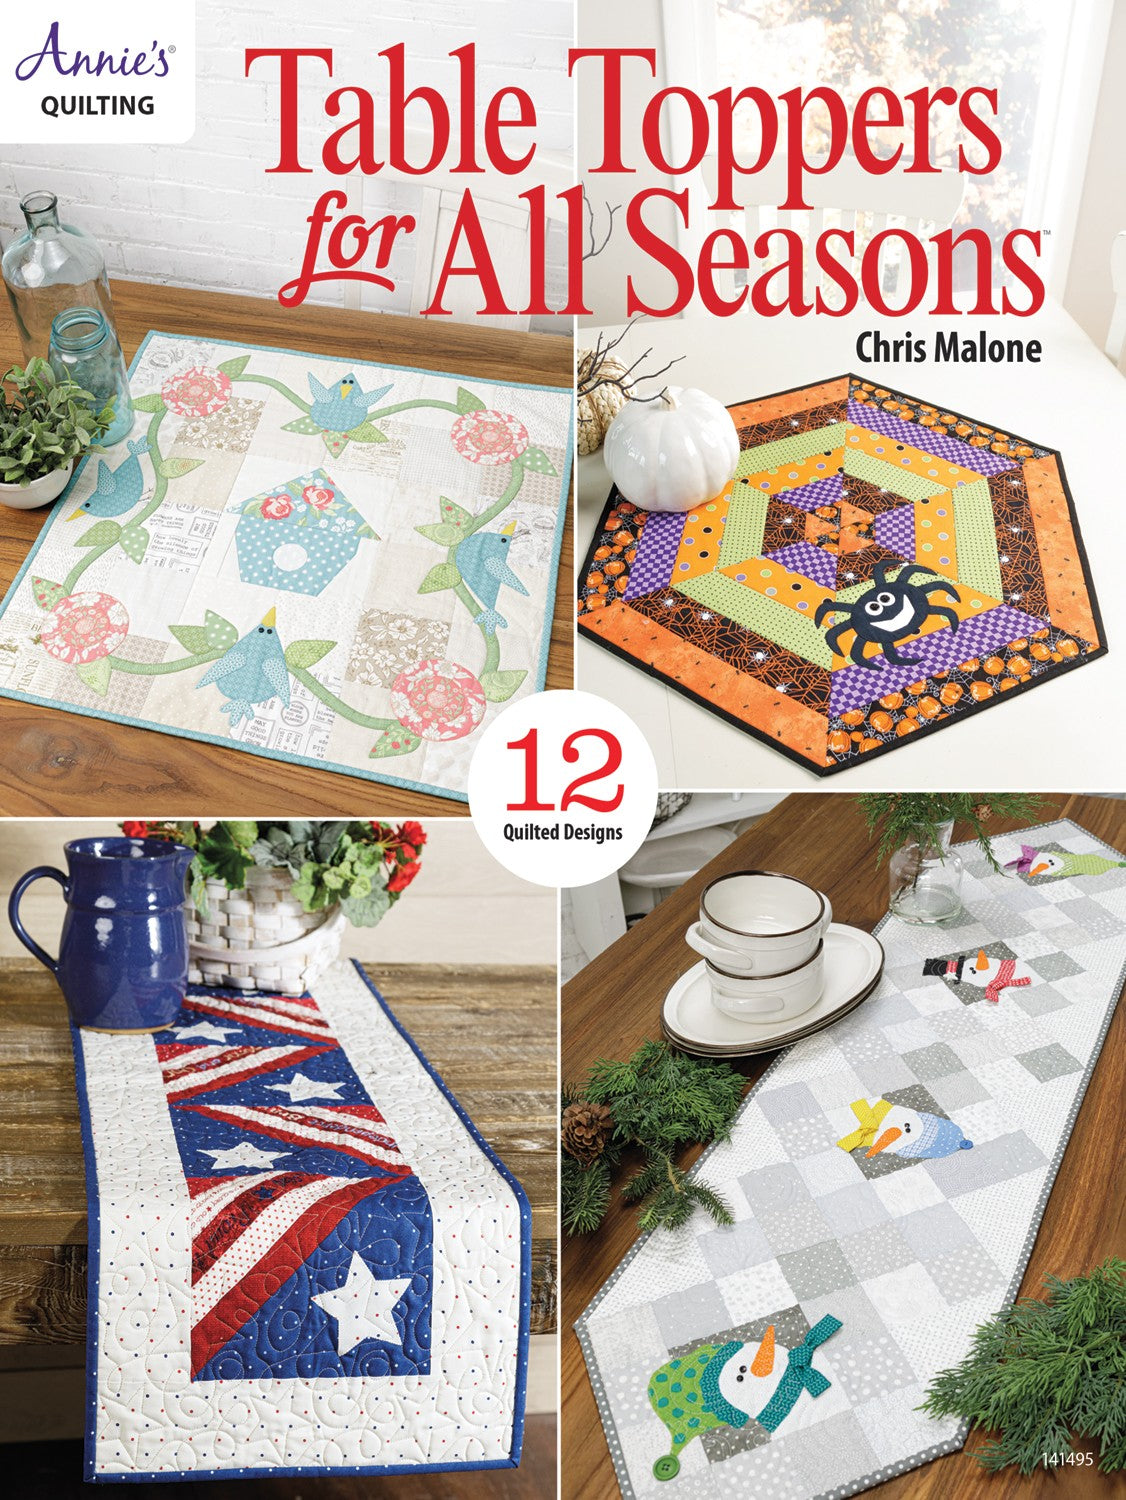 Table Toppers for All Seasons by Annie's Quilting